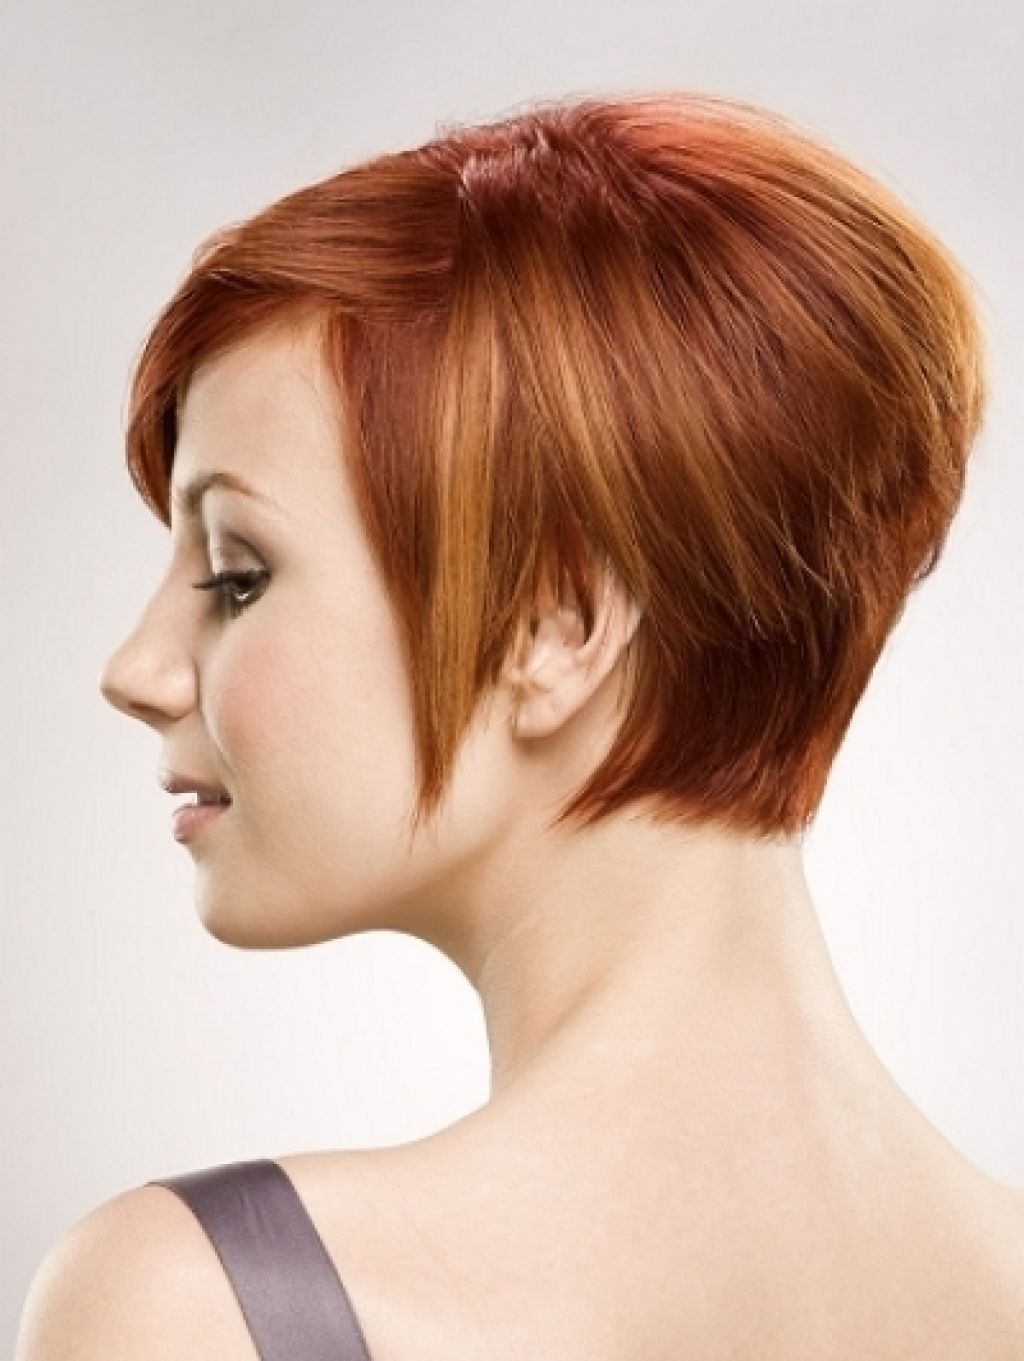 Short Black Hair With Red Highlights – Hairstyle For Women & Man Throughout Short Hairstyles With Red Highlights (View 4 of 25)